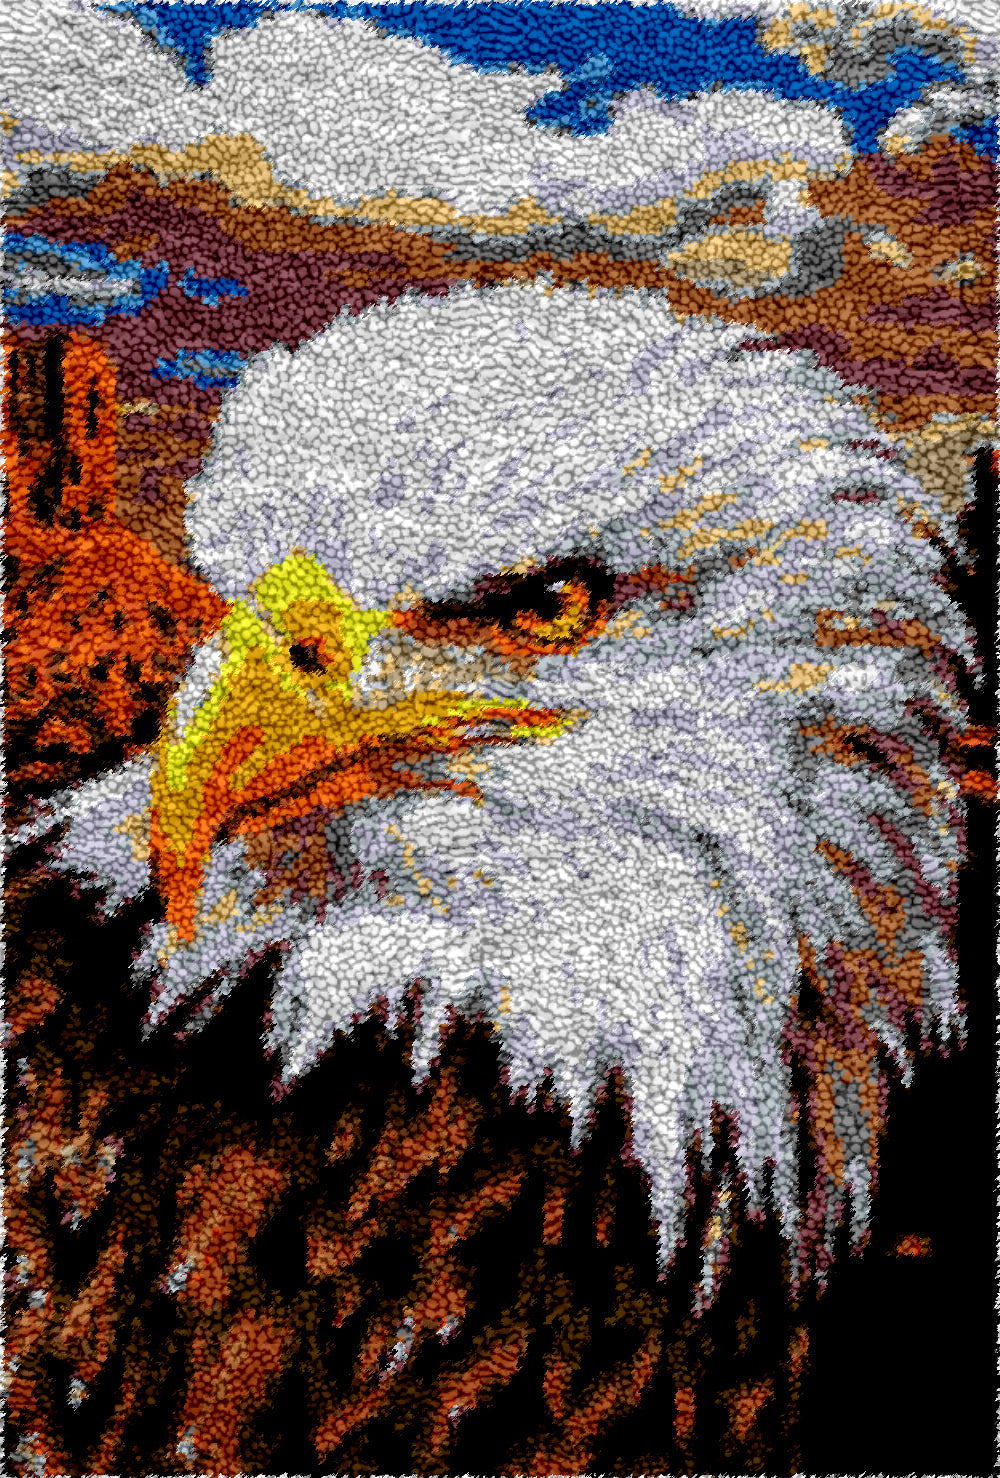 American Bald Eagle Latch Hook Rug by Heartful Crafts